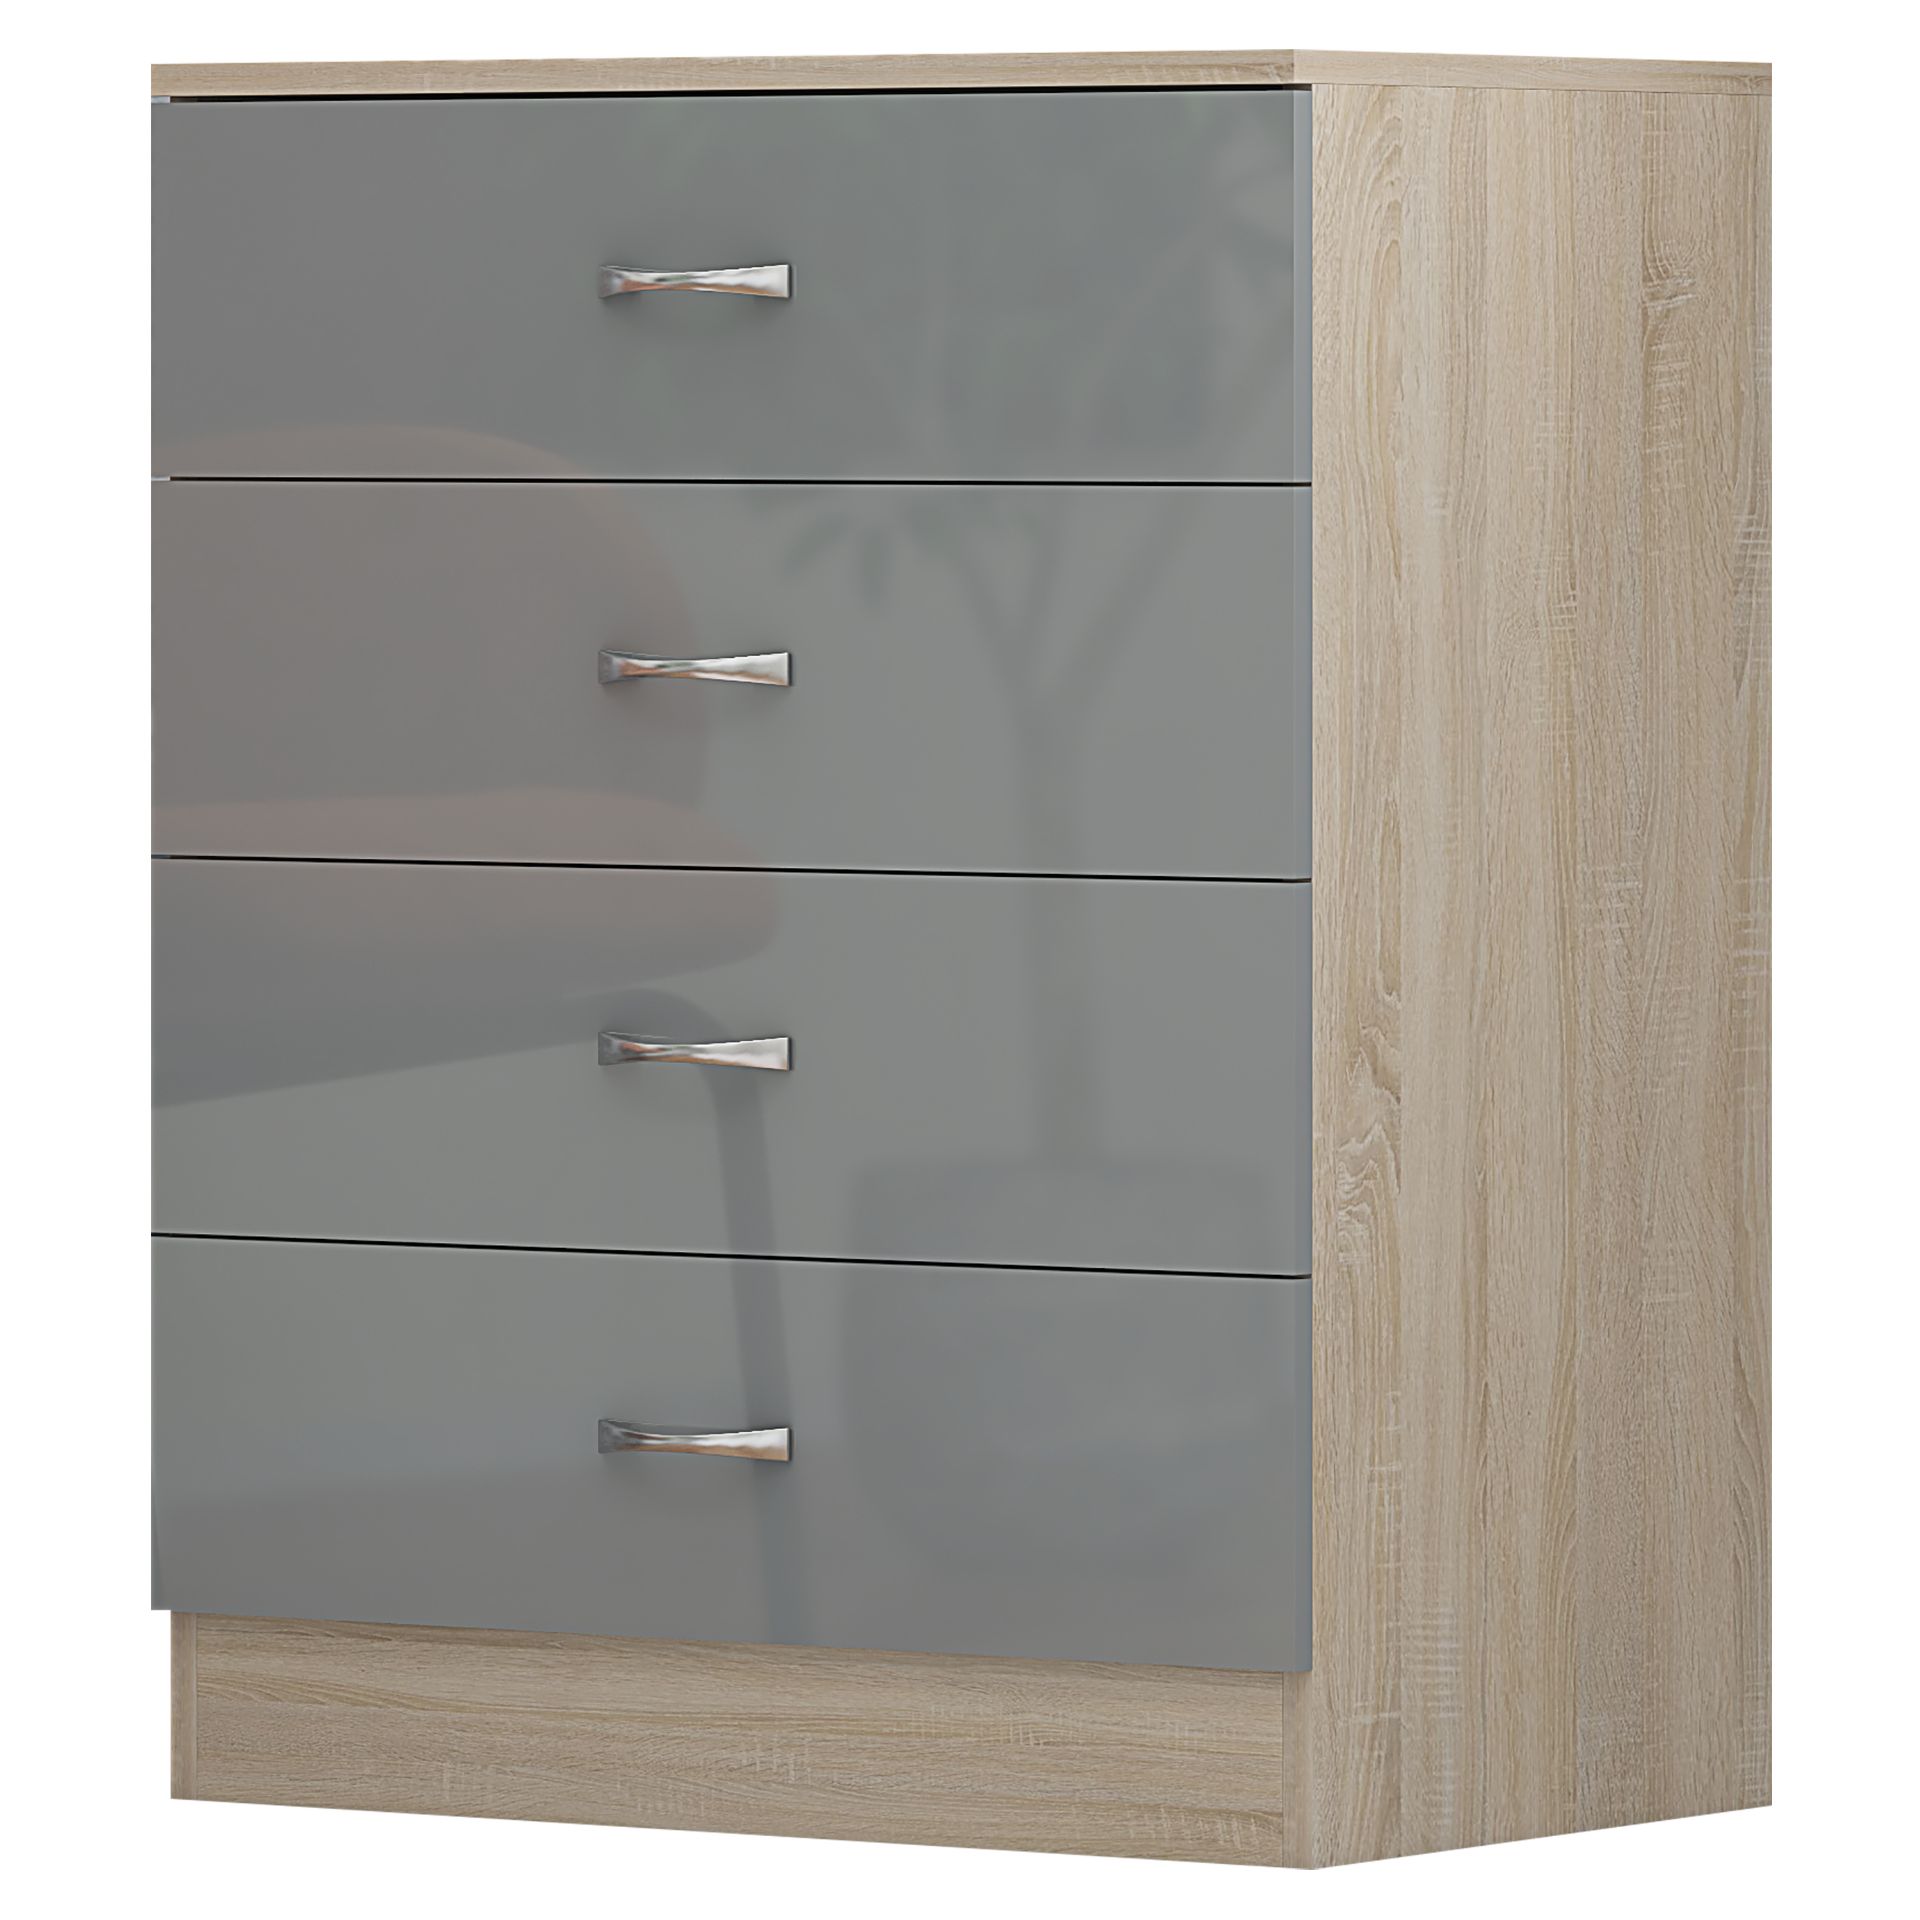 STUNNING CHEST OF DRAWERS X 2 - HIGH GLOSS GREY ON SONOMA OAK FRAME - Image 3 of 9